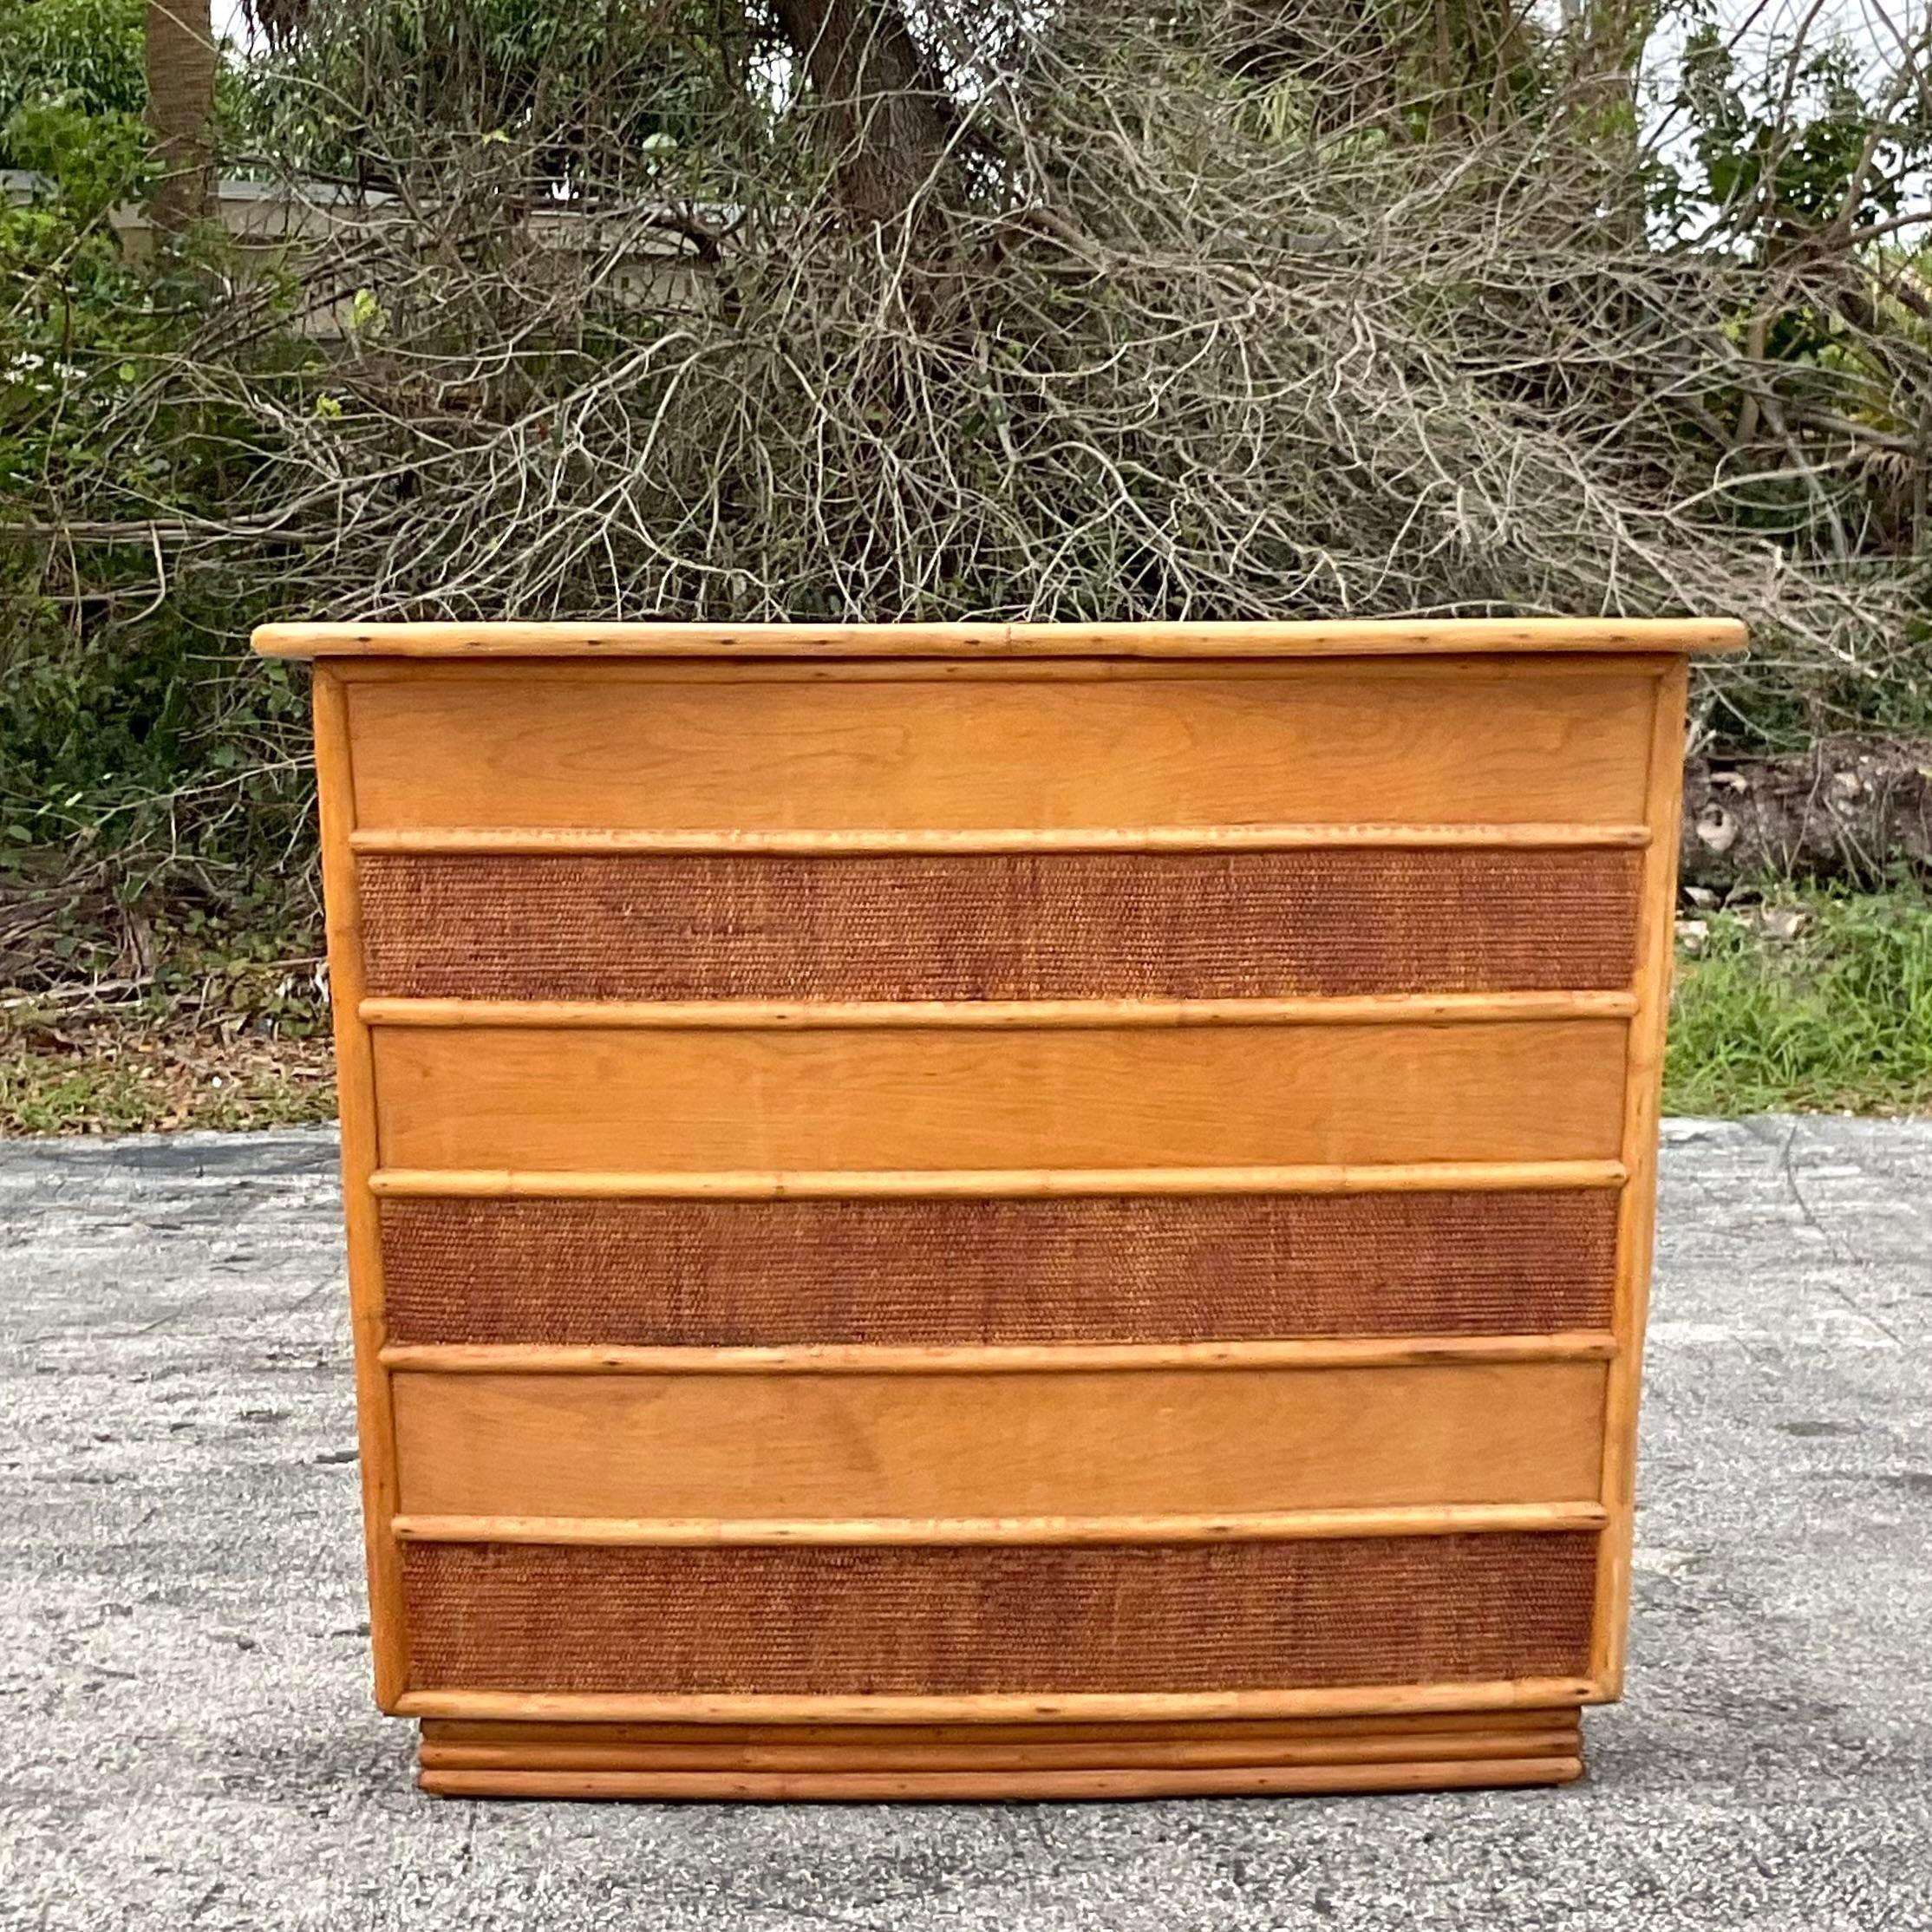 Mid 20th Century Vintage Coastal Grasscloth Band Dry Bar In Good Condition For Sale In west palm beach, FL